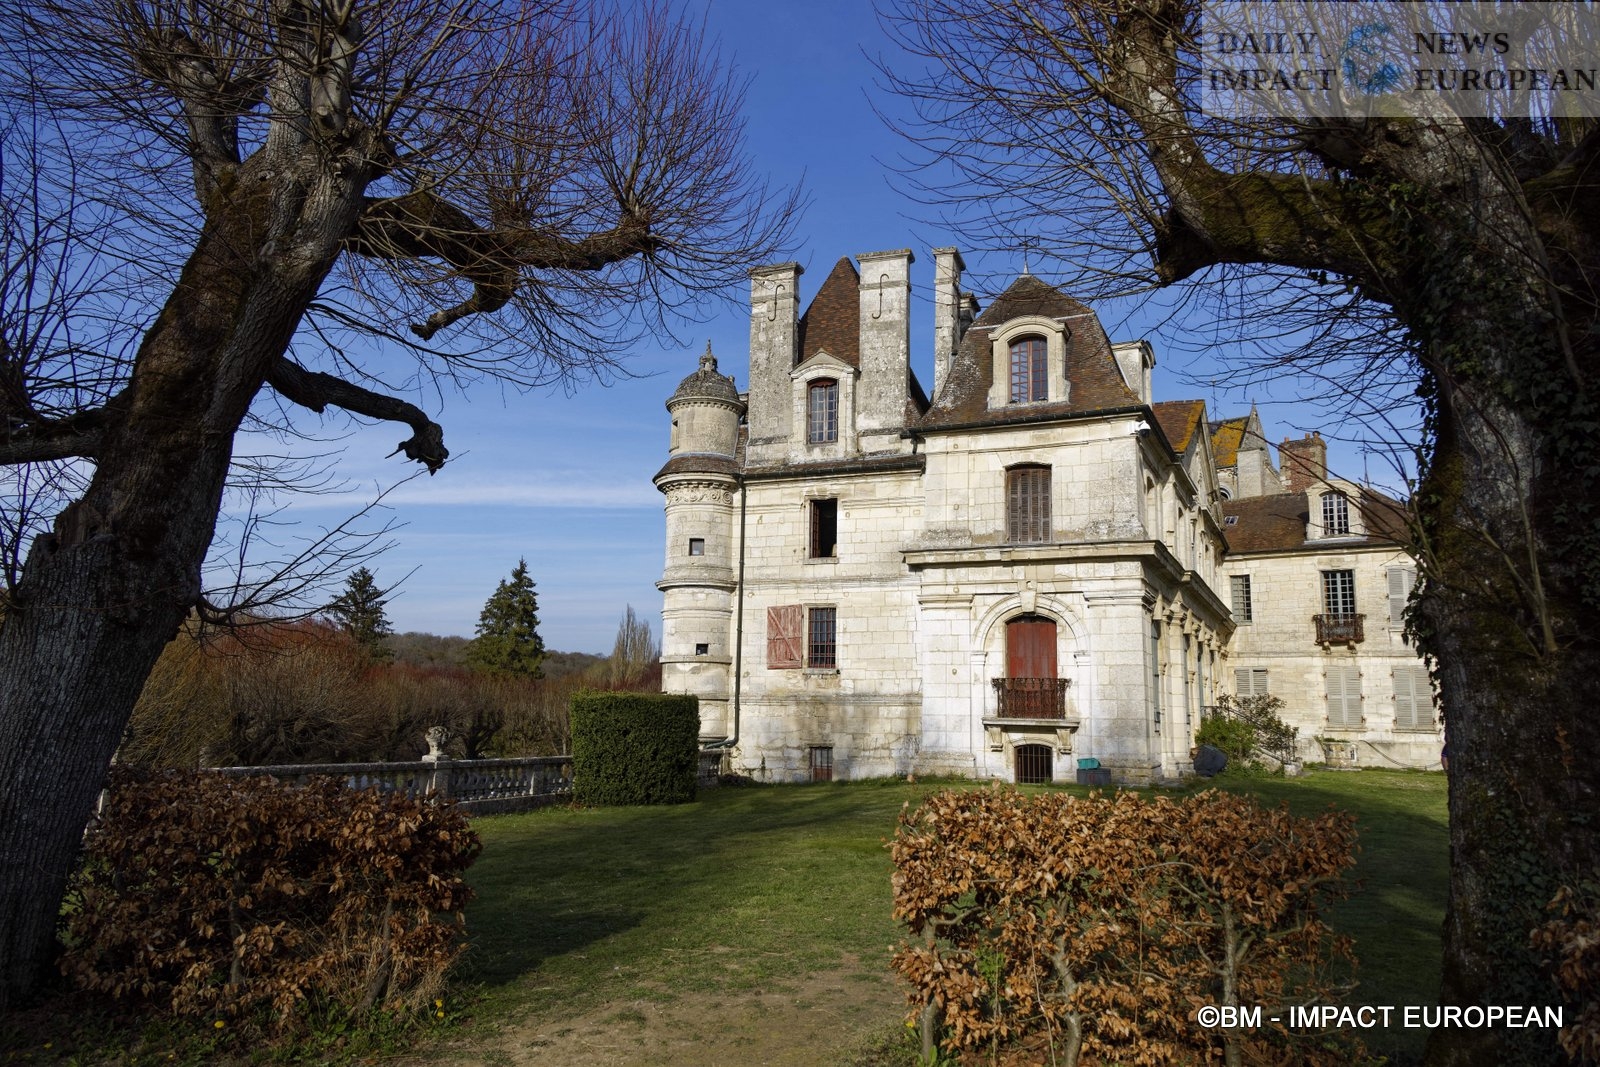 8 Extraordinary Facts About Château De Gisors 